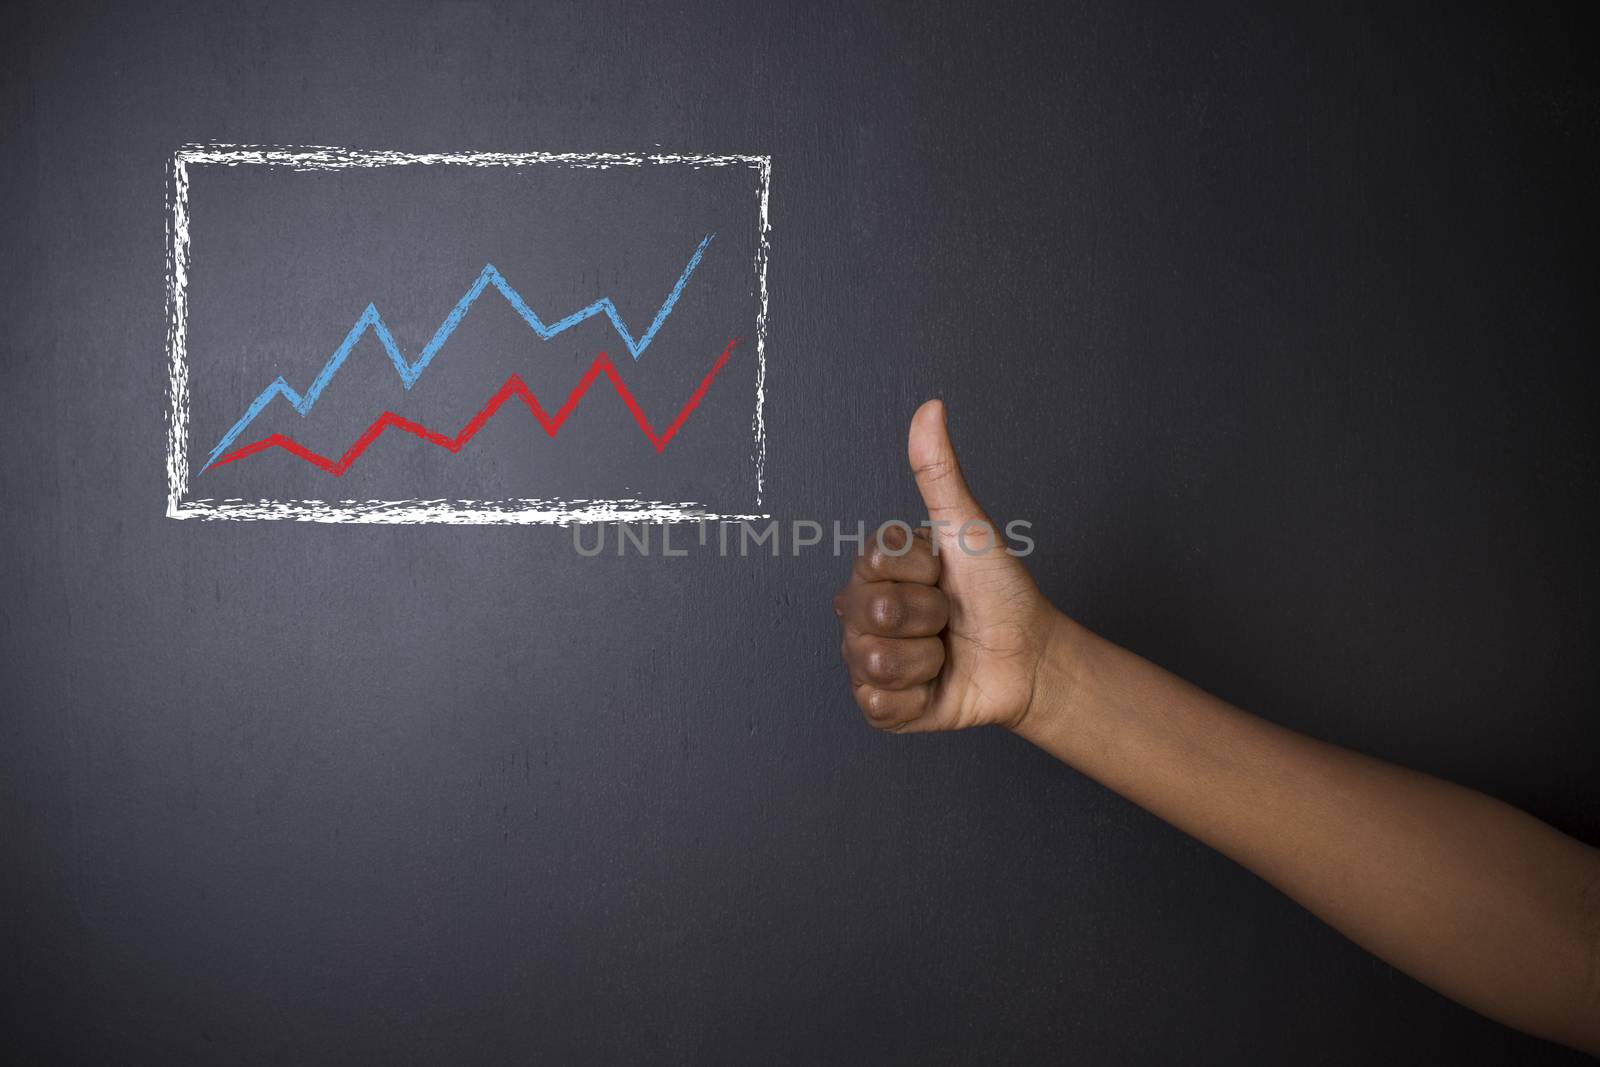 South African or African American teacher or student thumbs up against blackboard chalk   growth line graph by alistaircotton